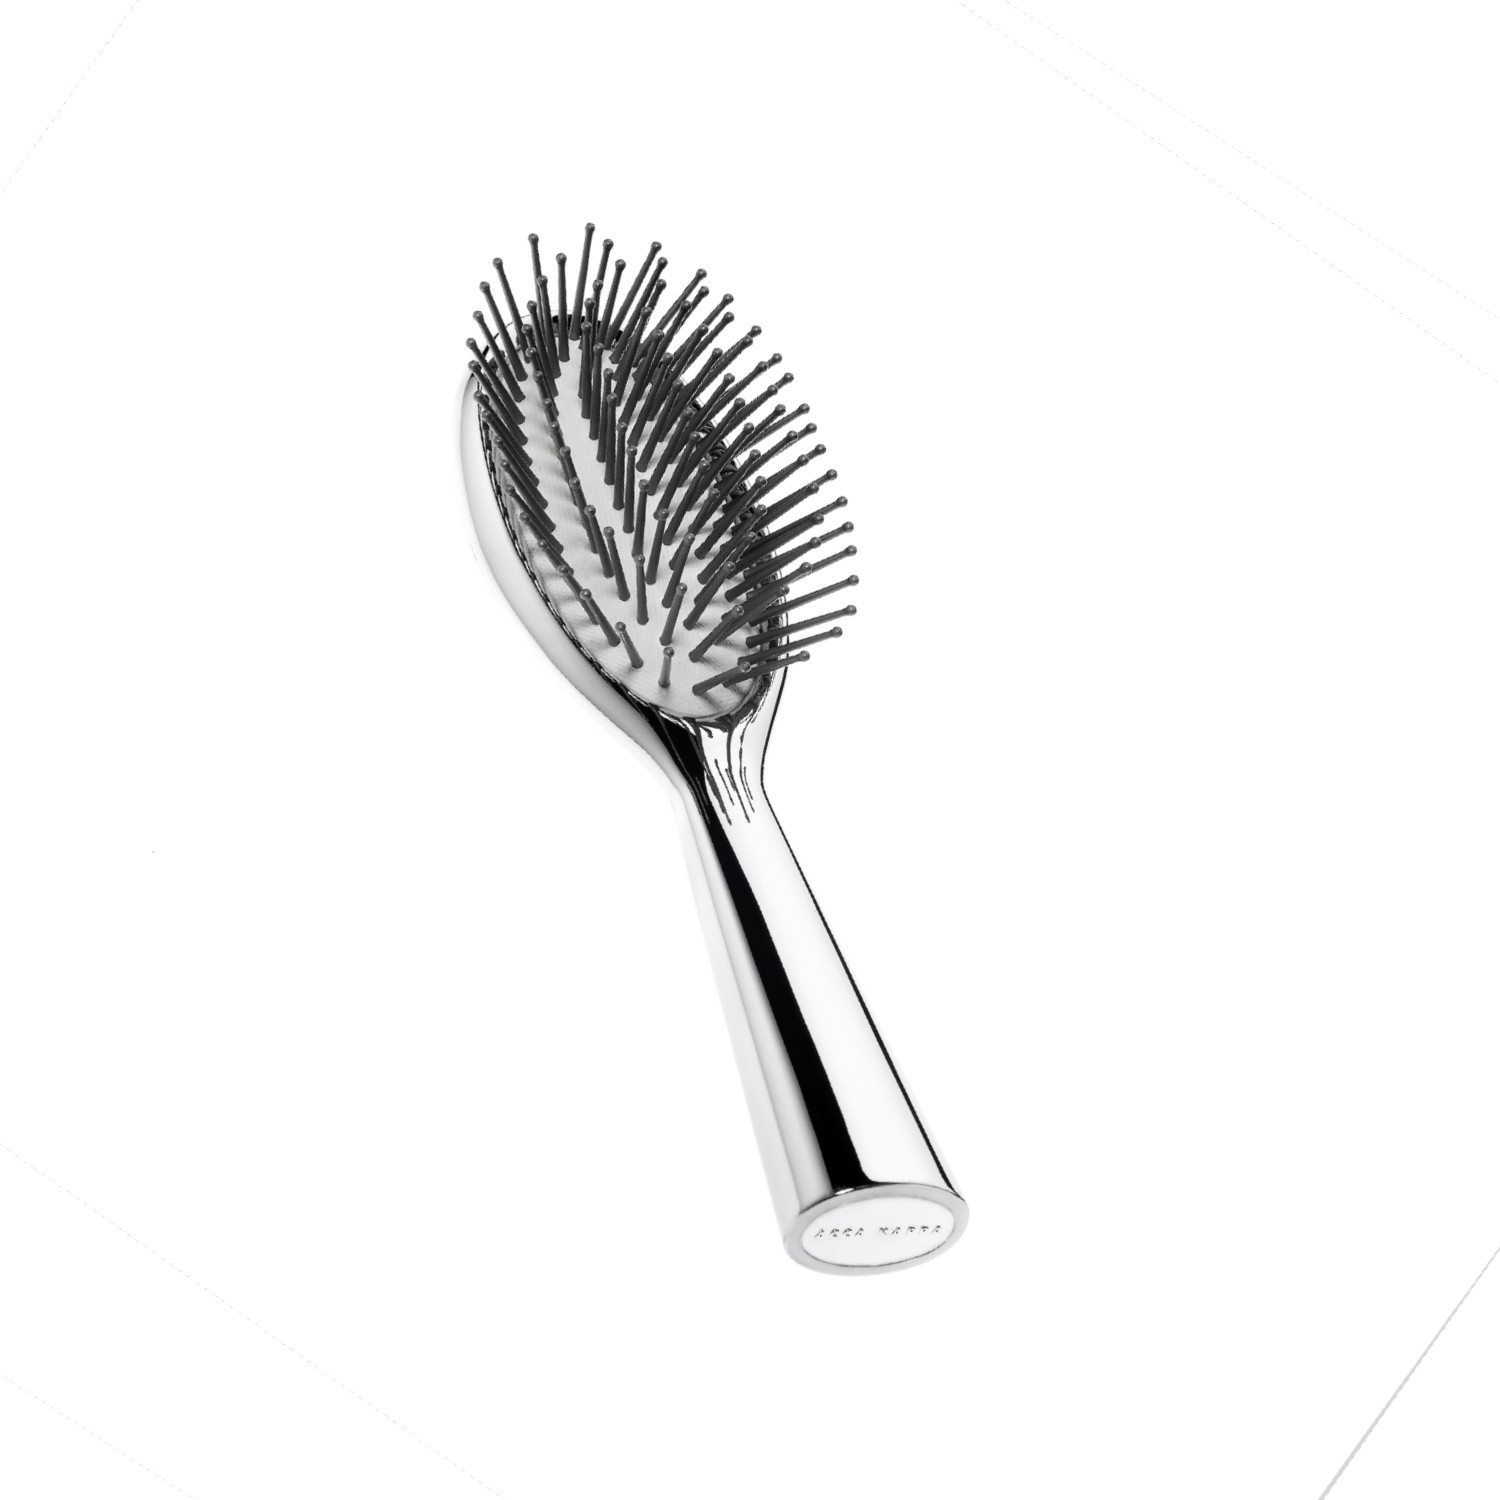 ACCA KAPPA Travel Chrome Hairbrush with Natural Rubber Cushion